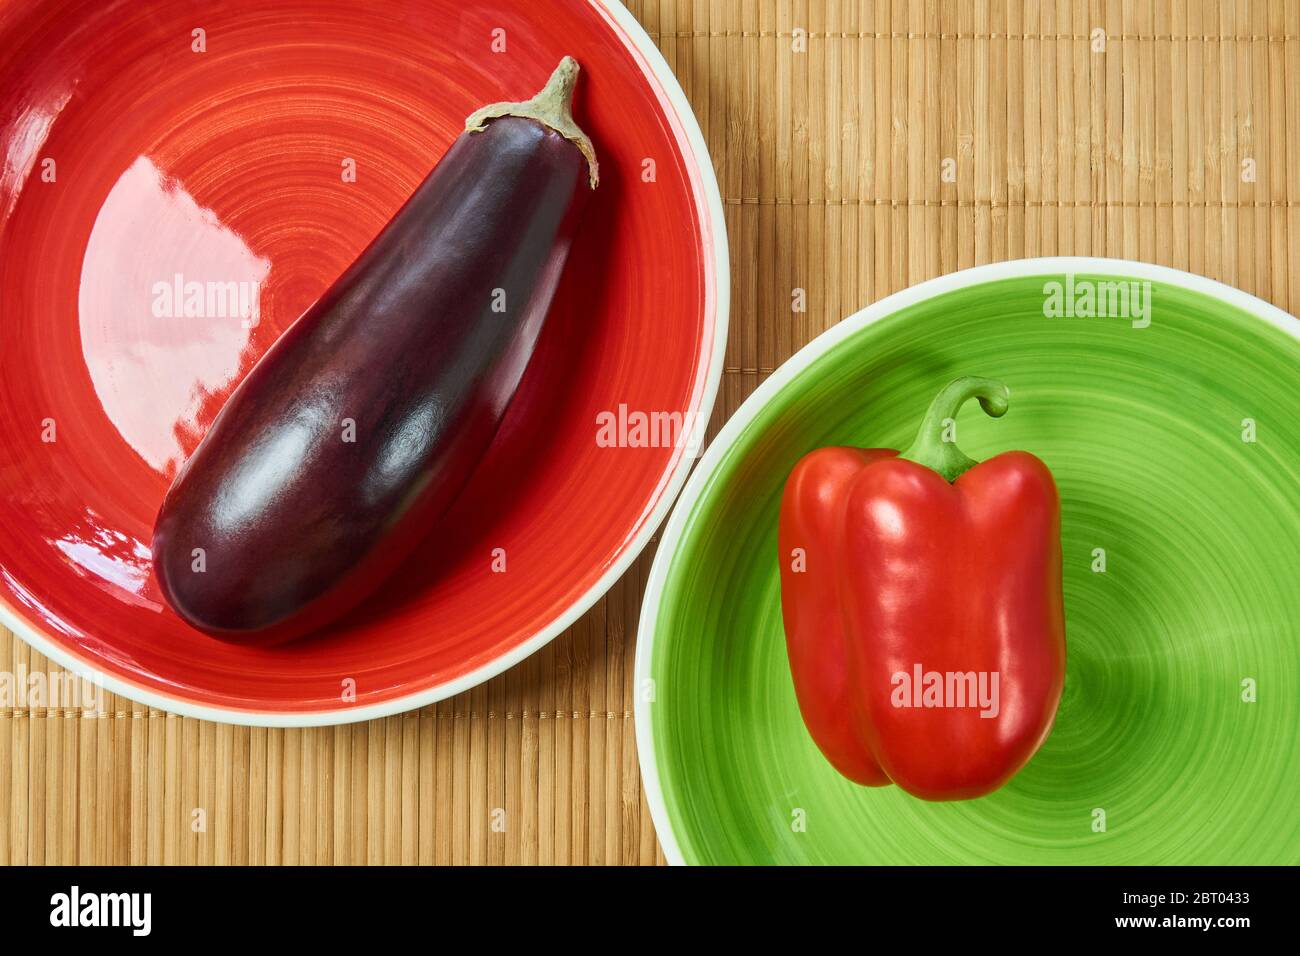 color contrasting still life - purple eggplant on a red plate and red bell pepper on a pale green plate next on a cane tablecloth Stock Photo